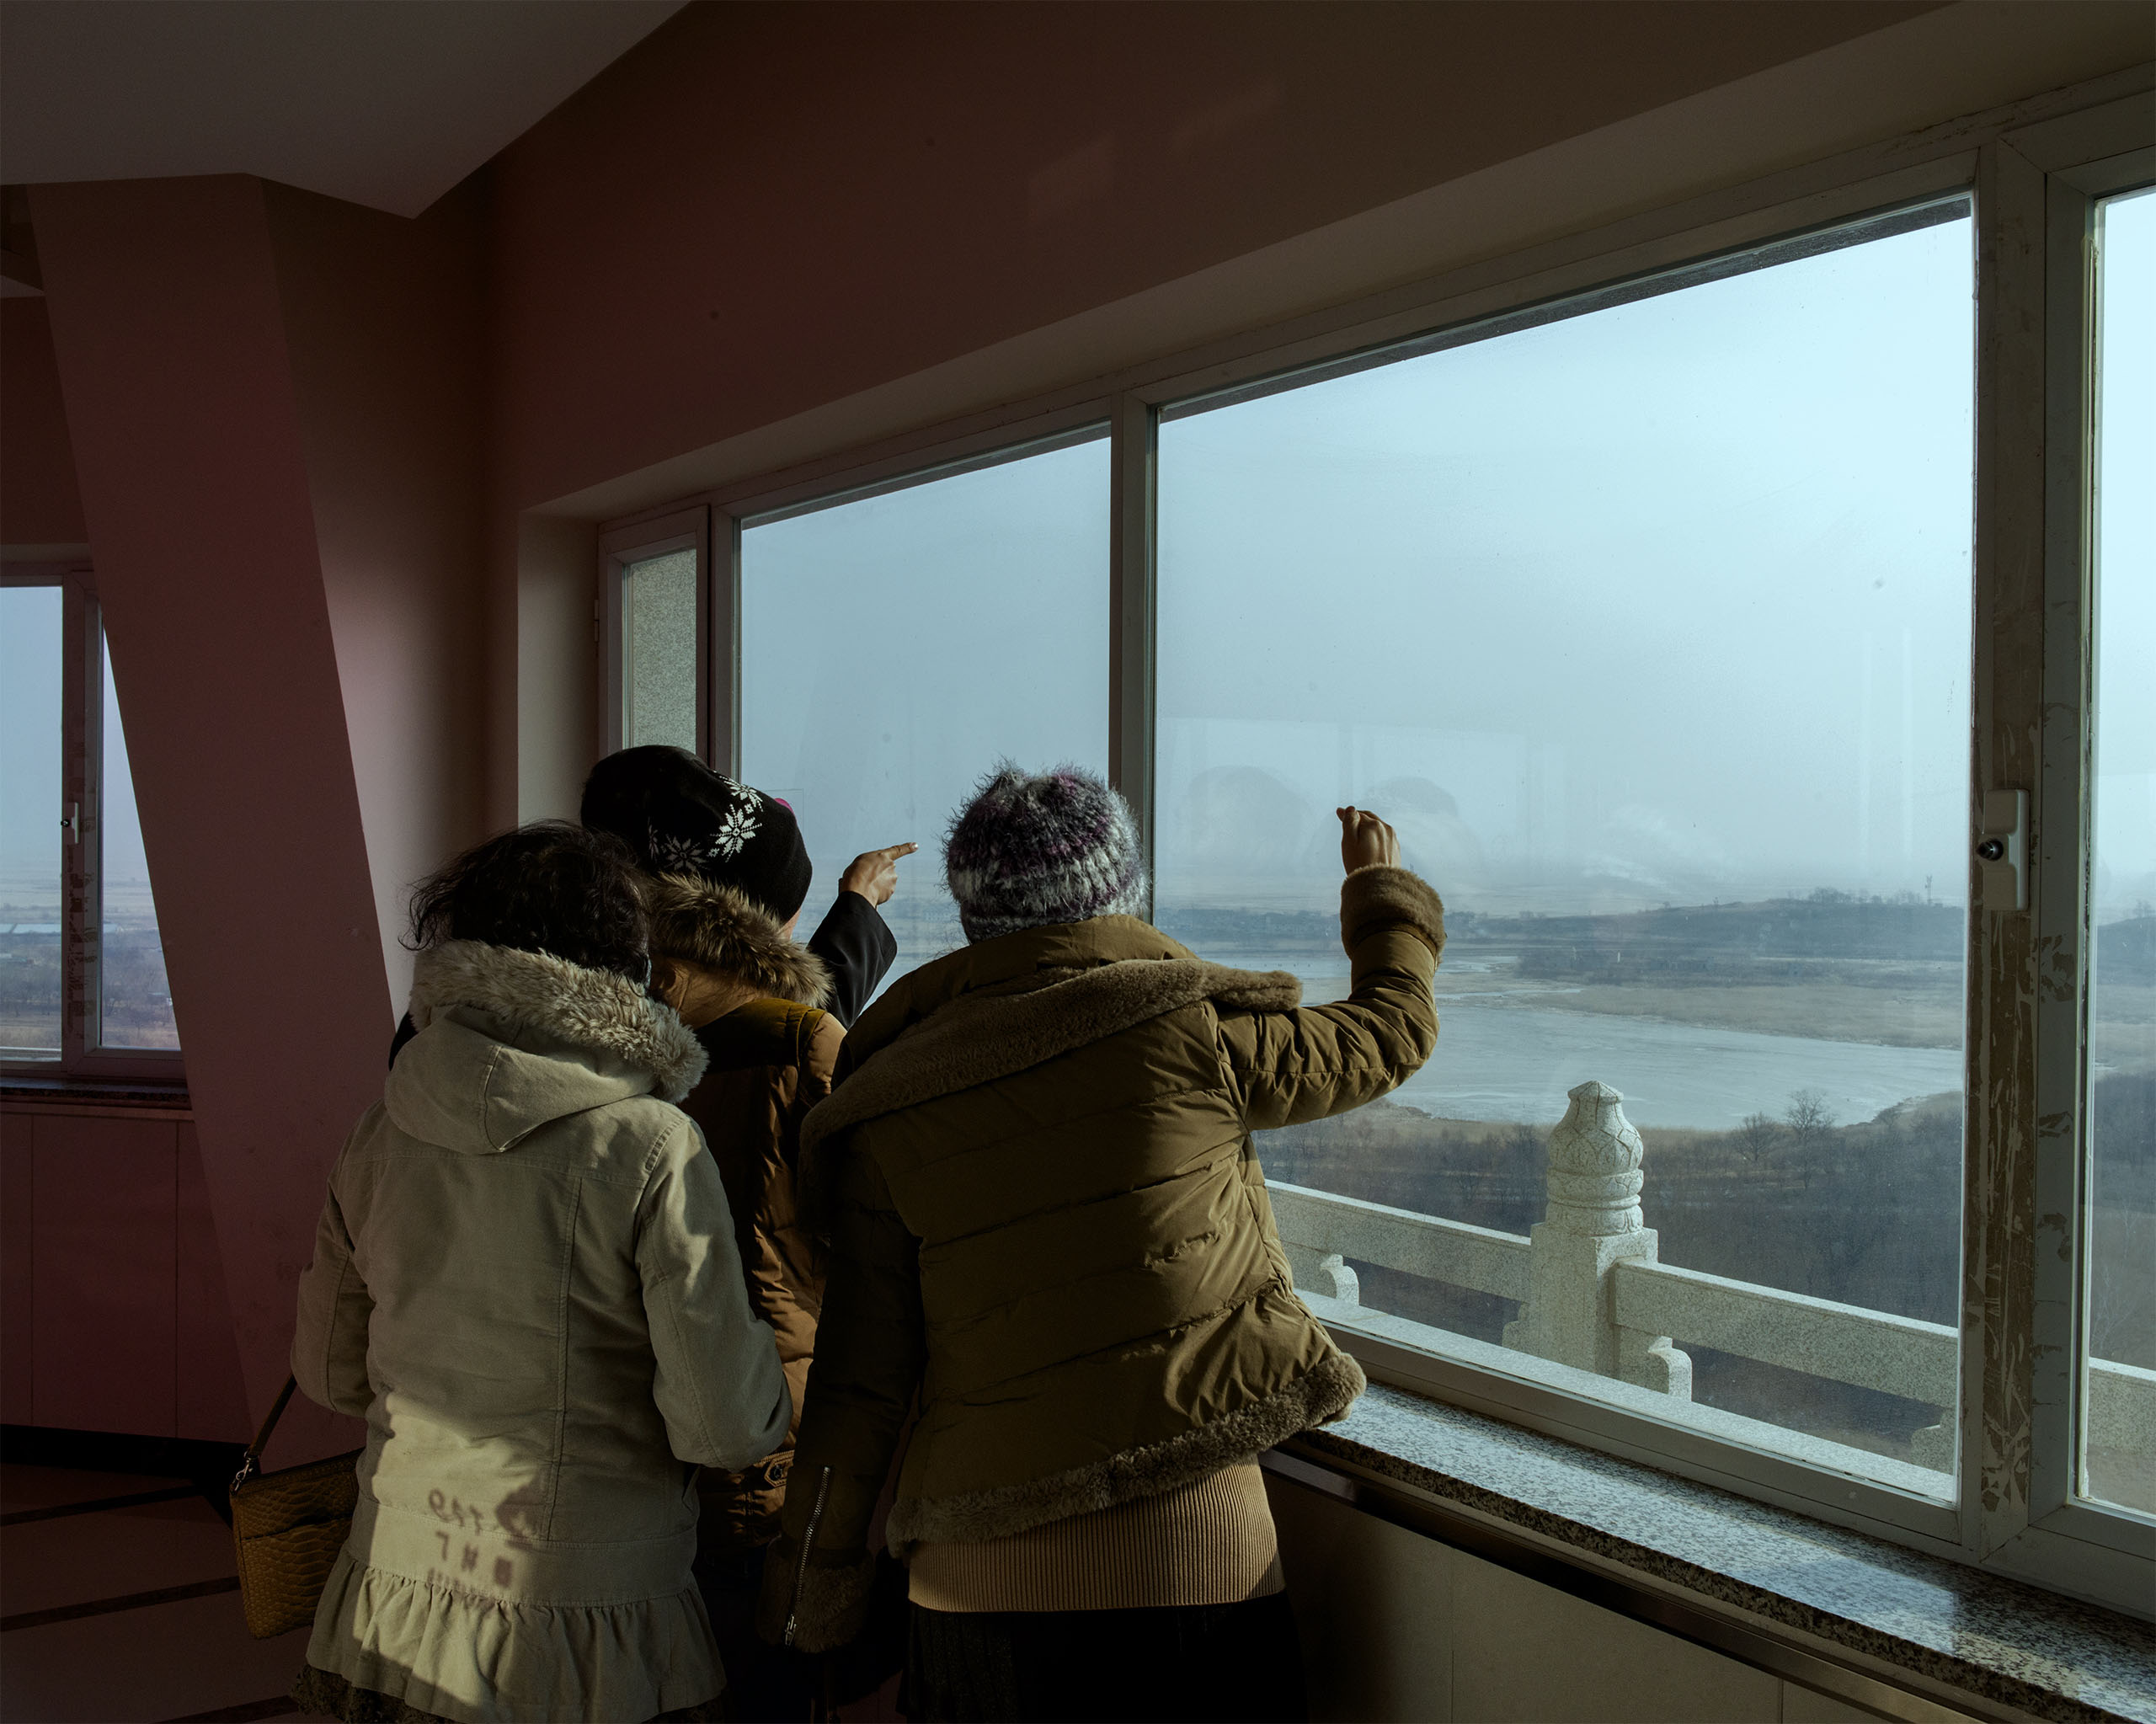 South Korean tourists point in Hunchun, China, point toward North Korea across the Tumen River. The Russian border lies to their left.